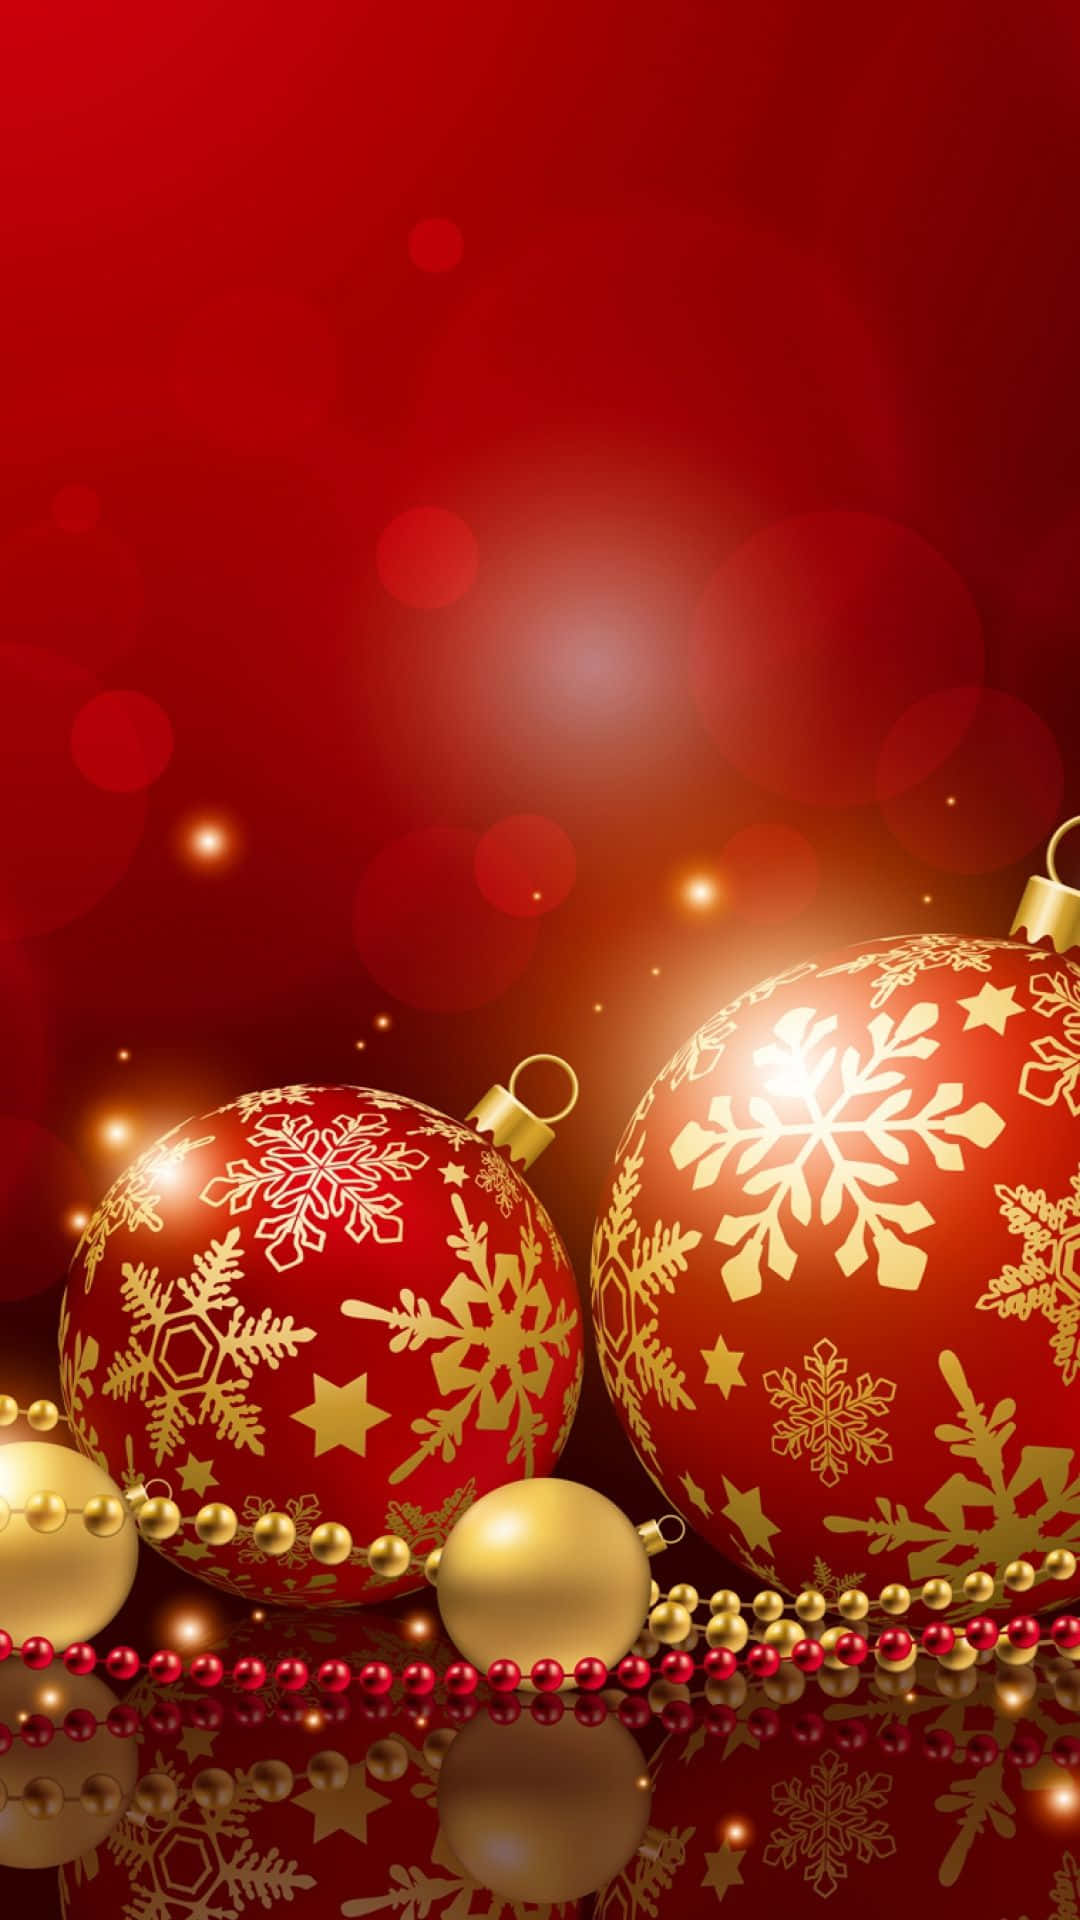 Spread holiday cheer with iPhone Wallpaper